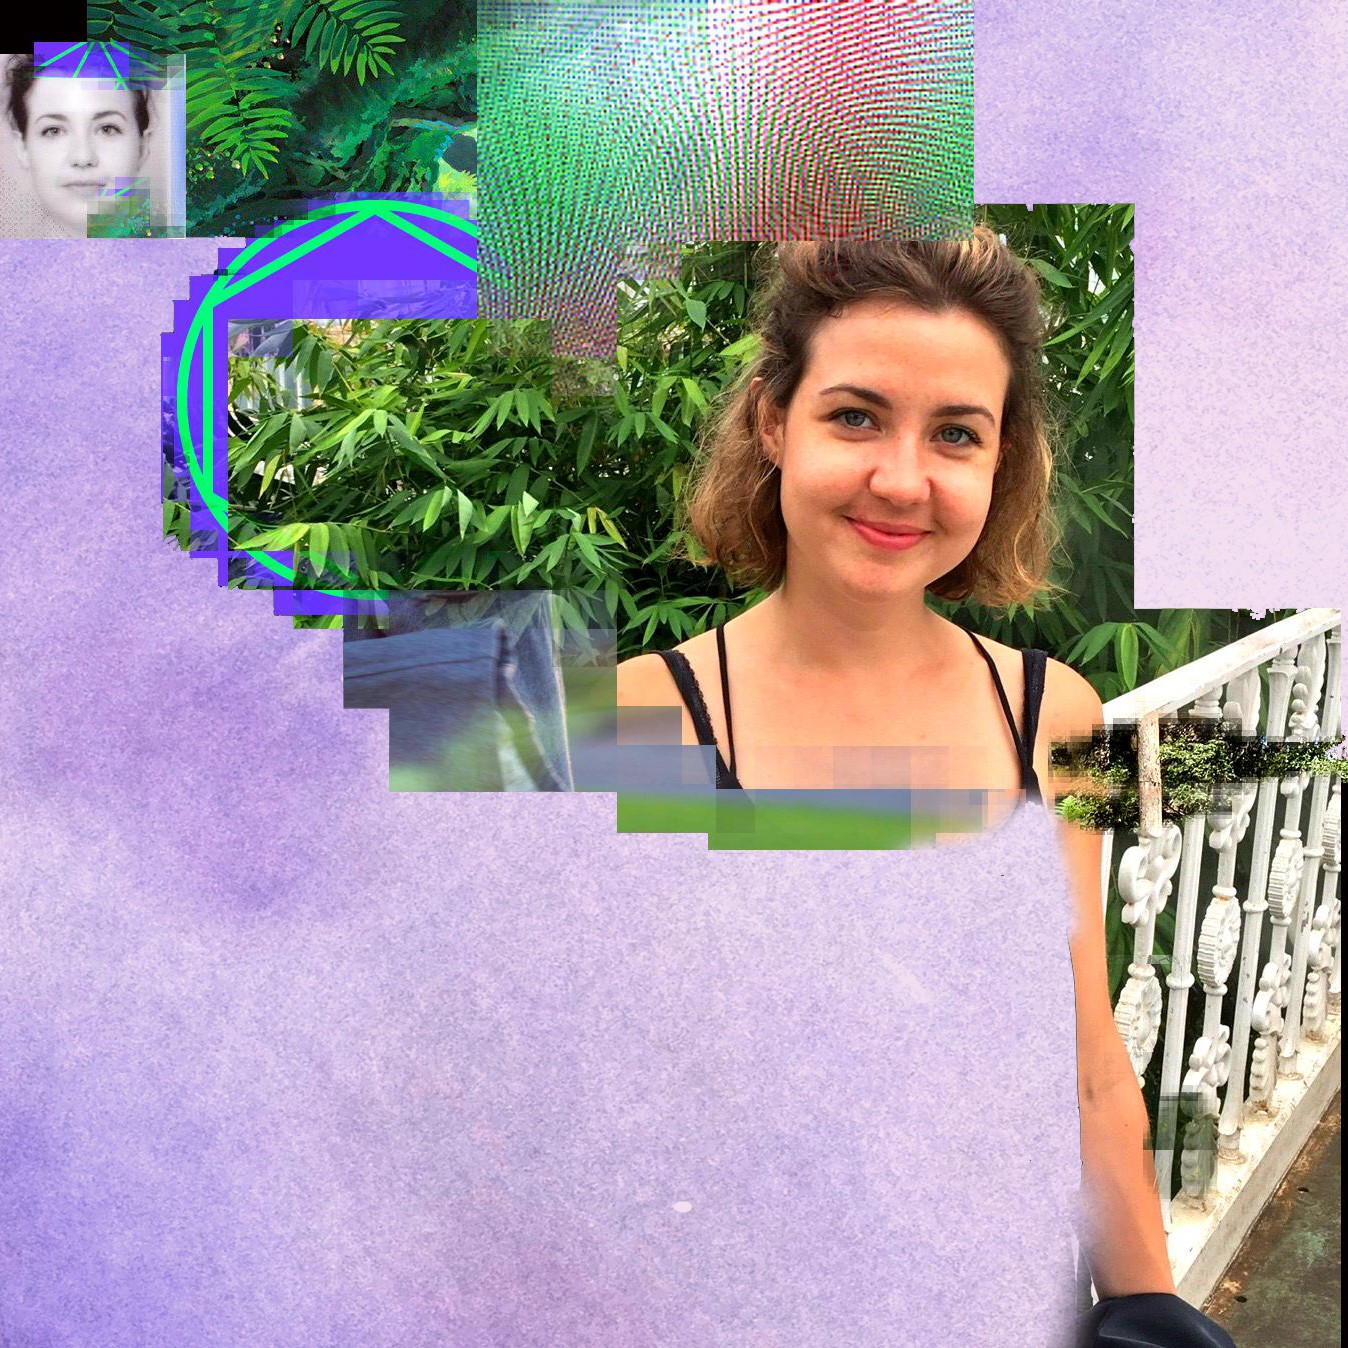 A collage of images, including fragments of a forest, a woman standing in a glasshouse with plants behind and some colourful, pixelated textures